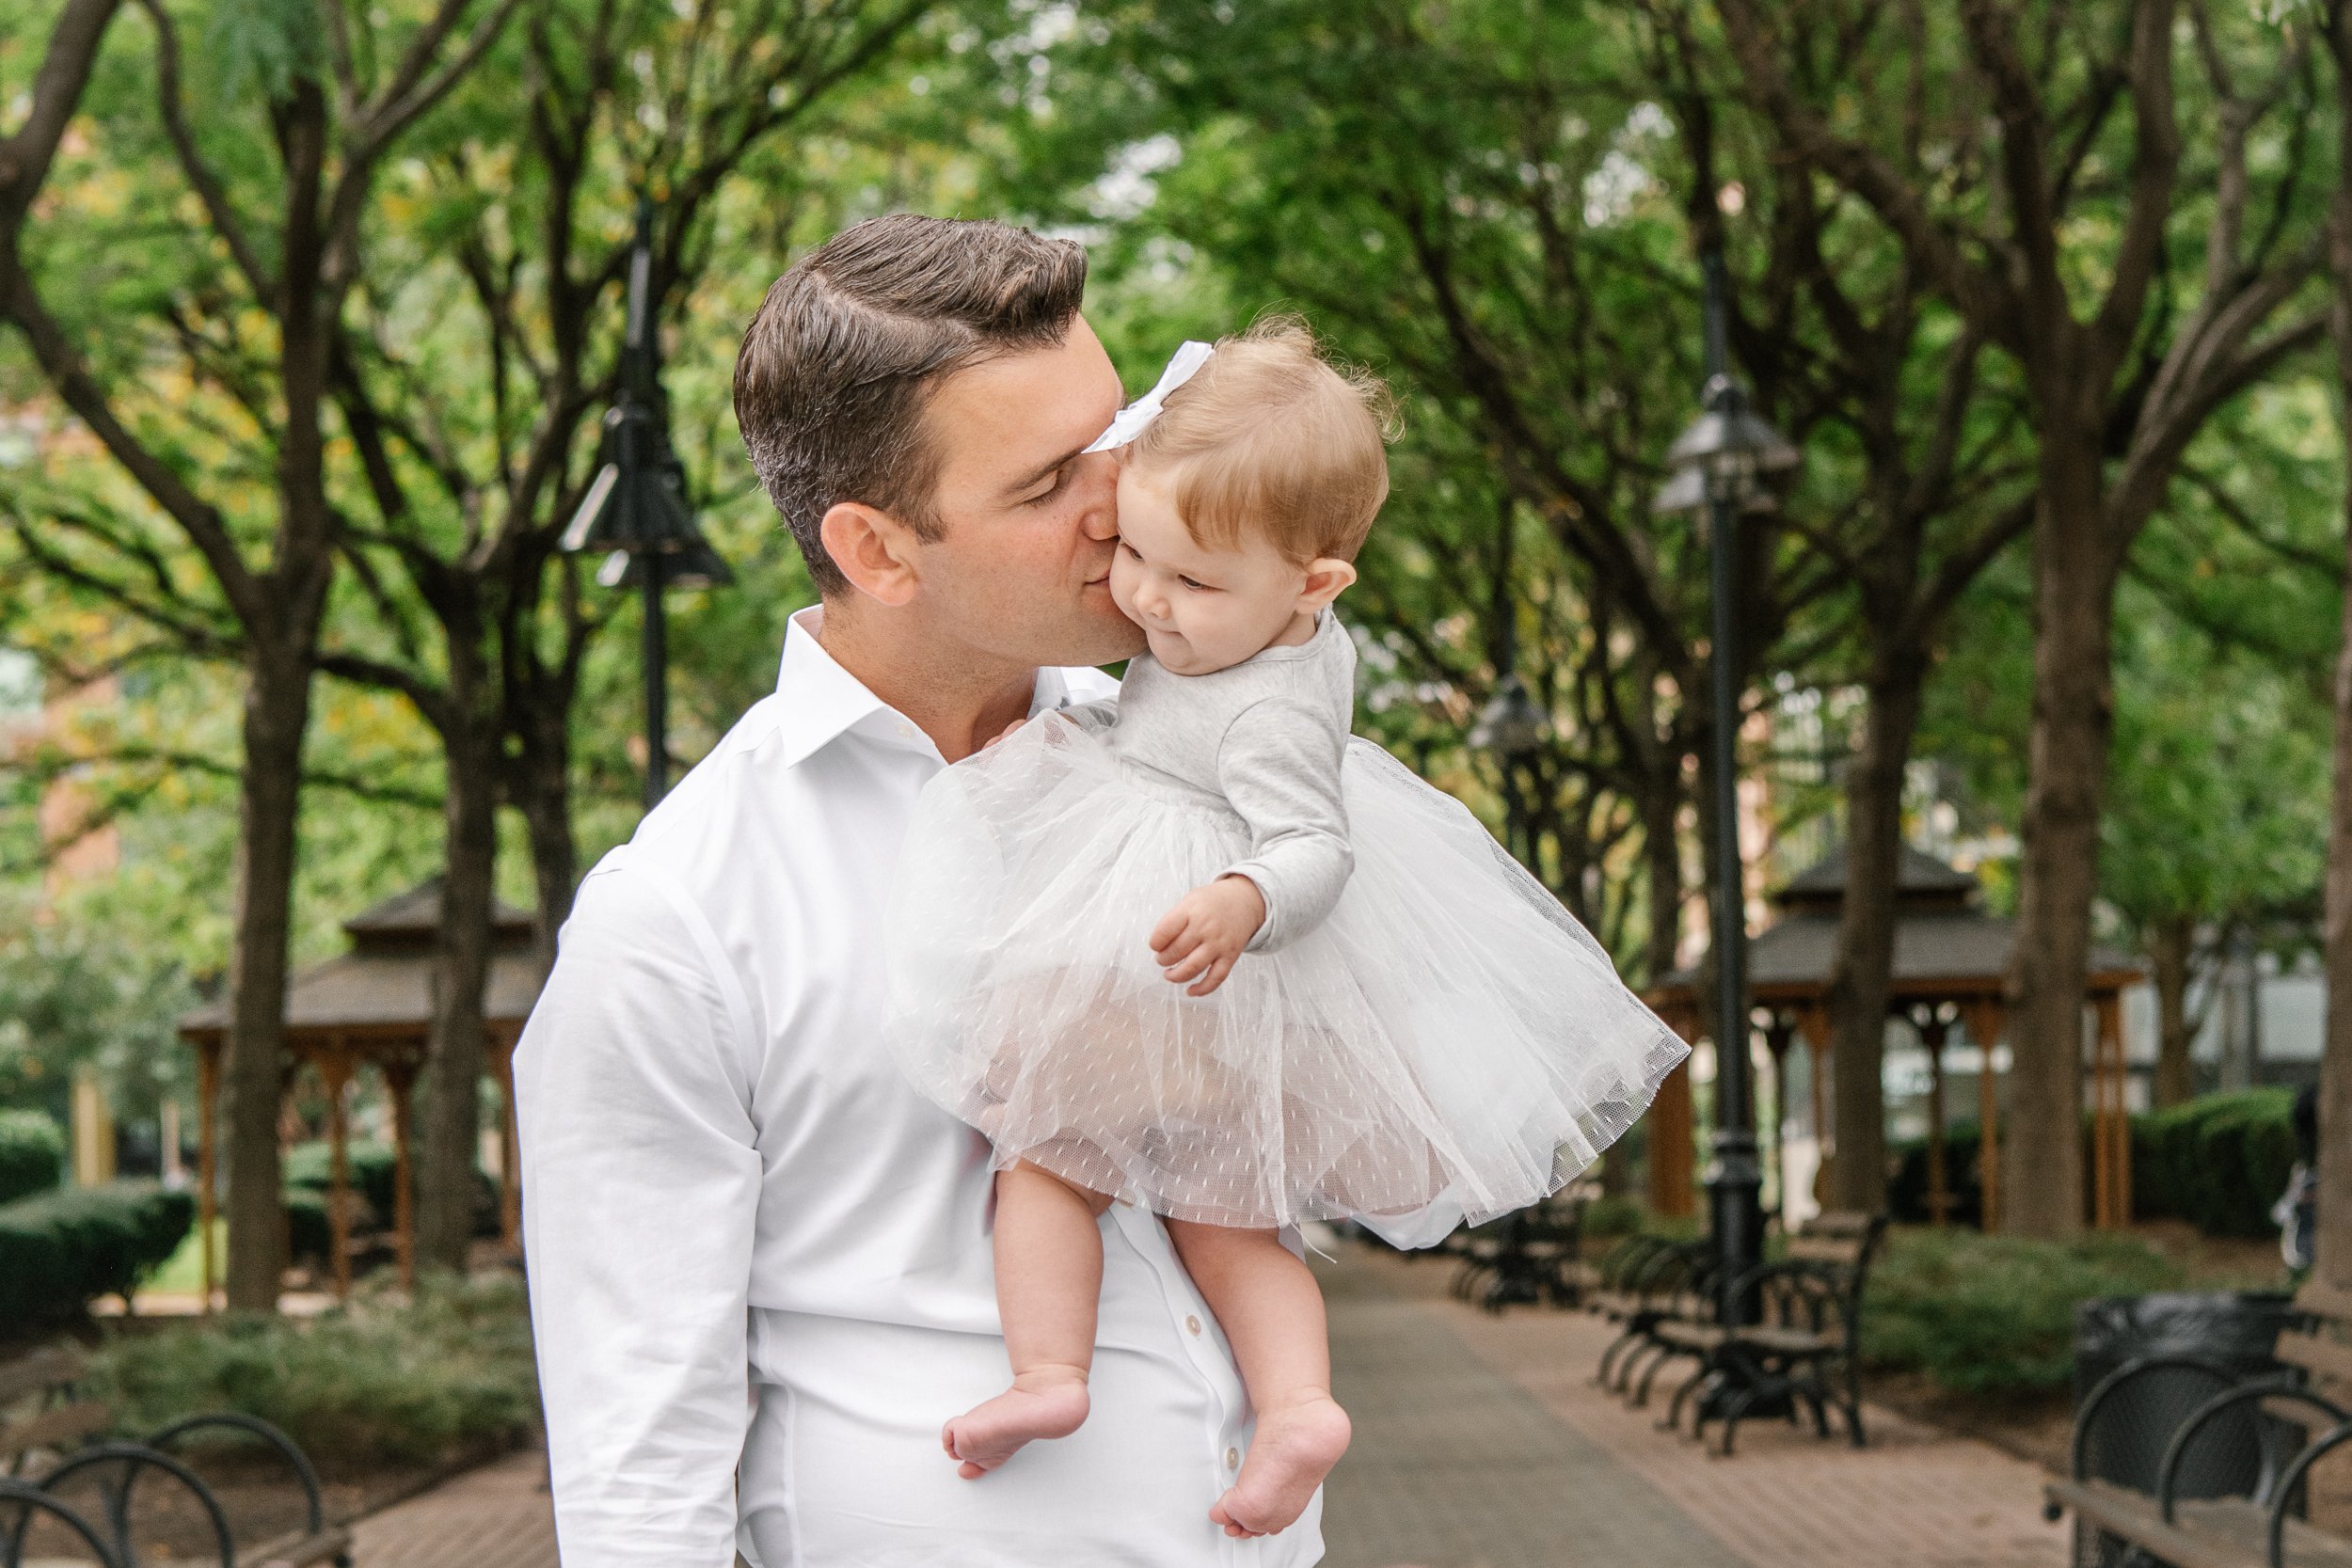  Father wearing a white button-up shirt kisses his baby girl on the cheek by Nicole Hawkins Photography. baby white tulle dress father kiss baby girl #nicolehawkinsphotography #newjerseyphotographers #familyphotographer #6monthportrait #NJfamilyphoto